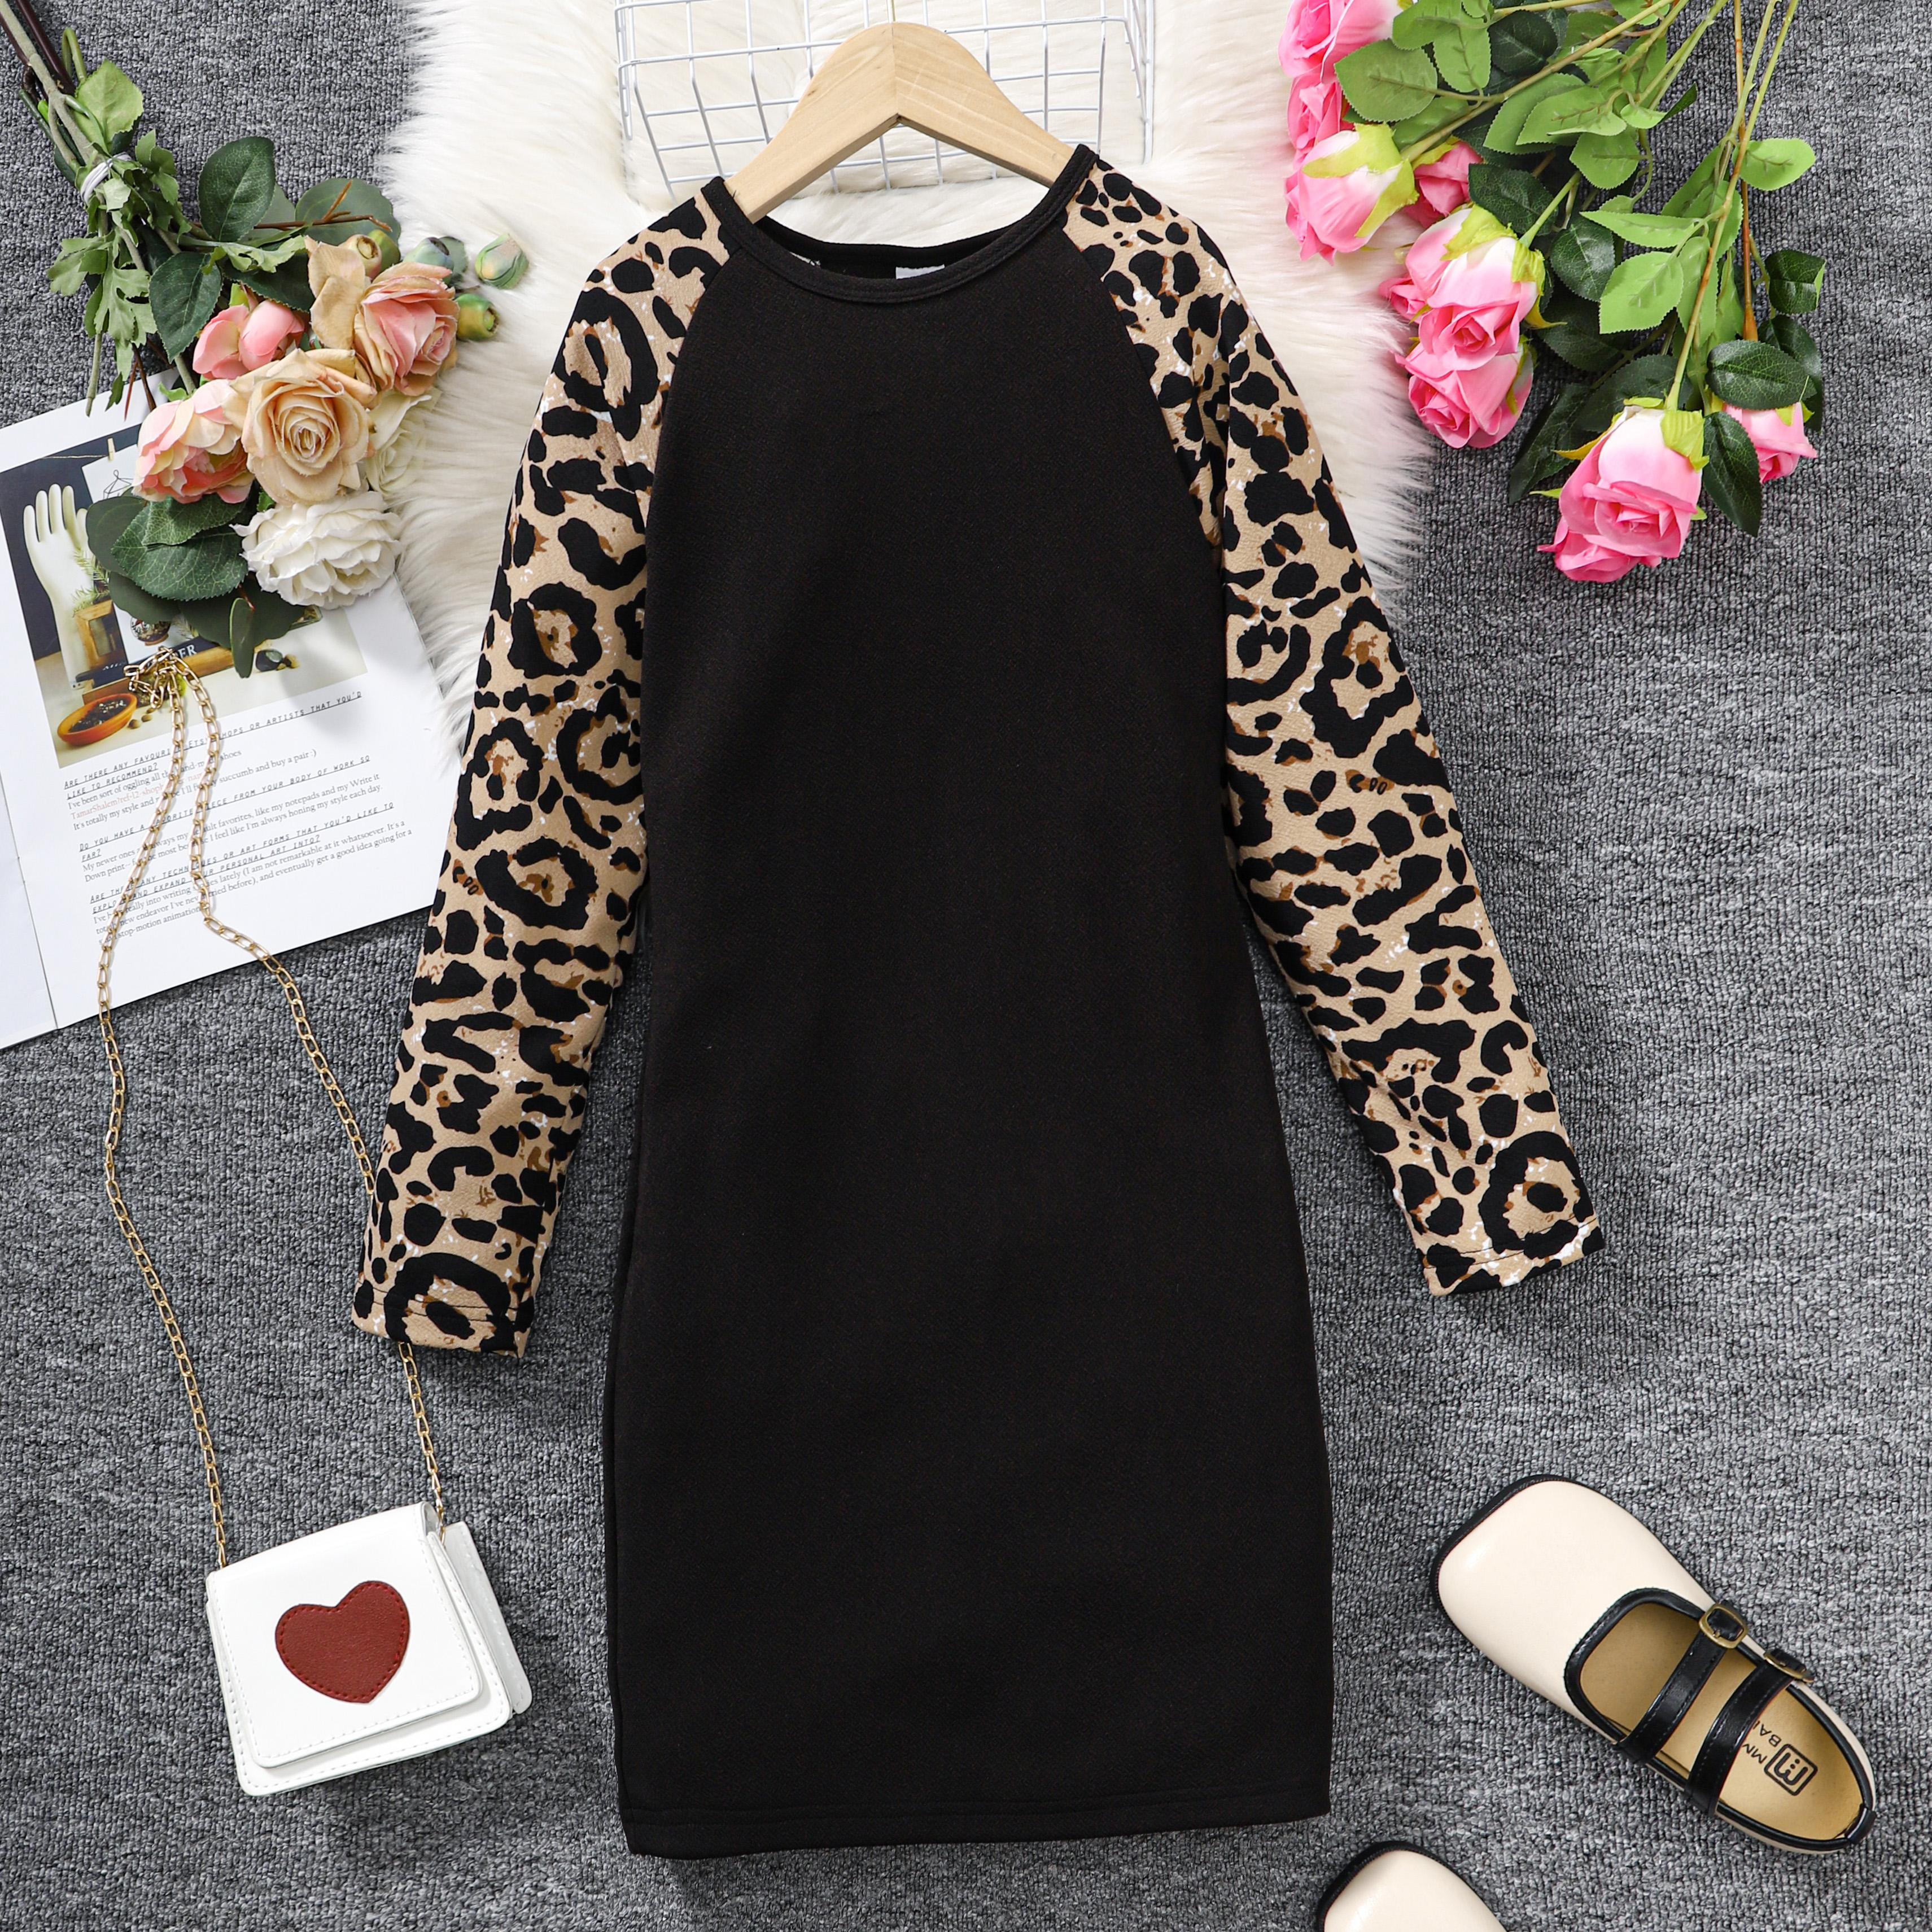 8-14Y Ready Stock Big Girls Dress Long Sleeves Color Block Leopard Splicing Dress For Party Kids Fall Winter Clothes Black Catpapa 462307028